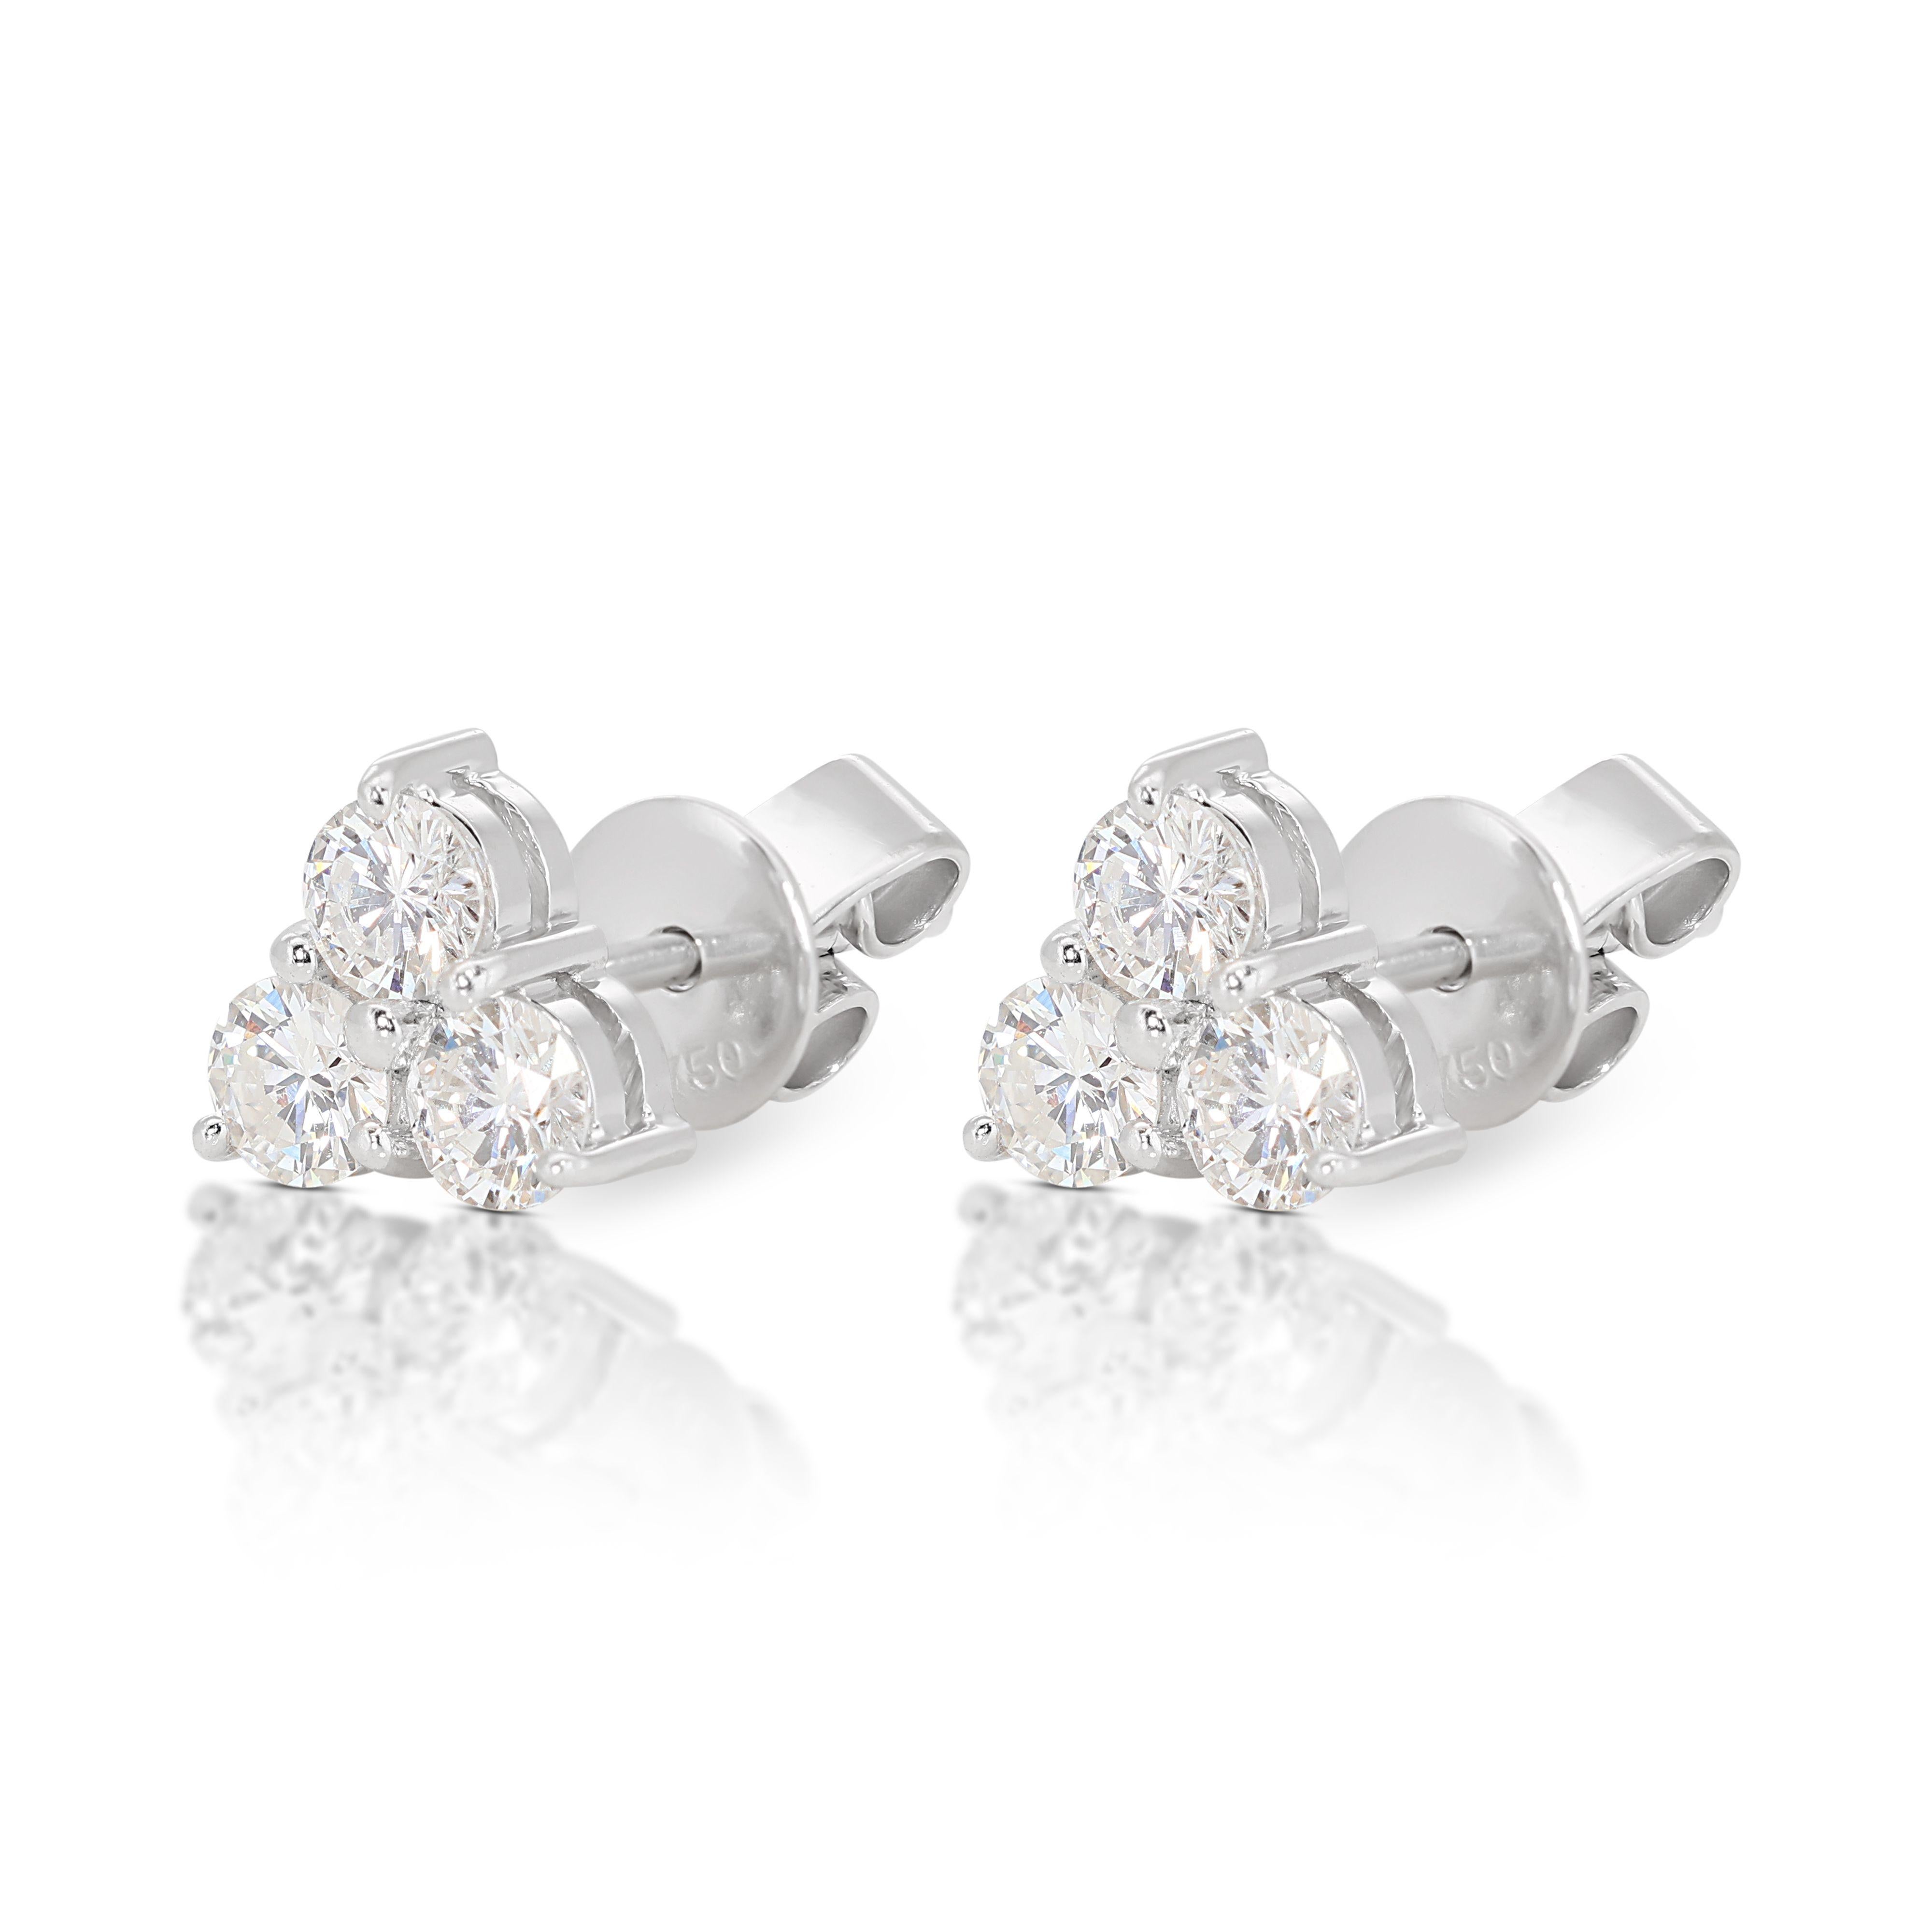 3-stone 0.90ct Diamond Earrings set in 18K White Gold In New Condition For Sale In רמת גן, IL